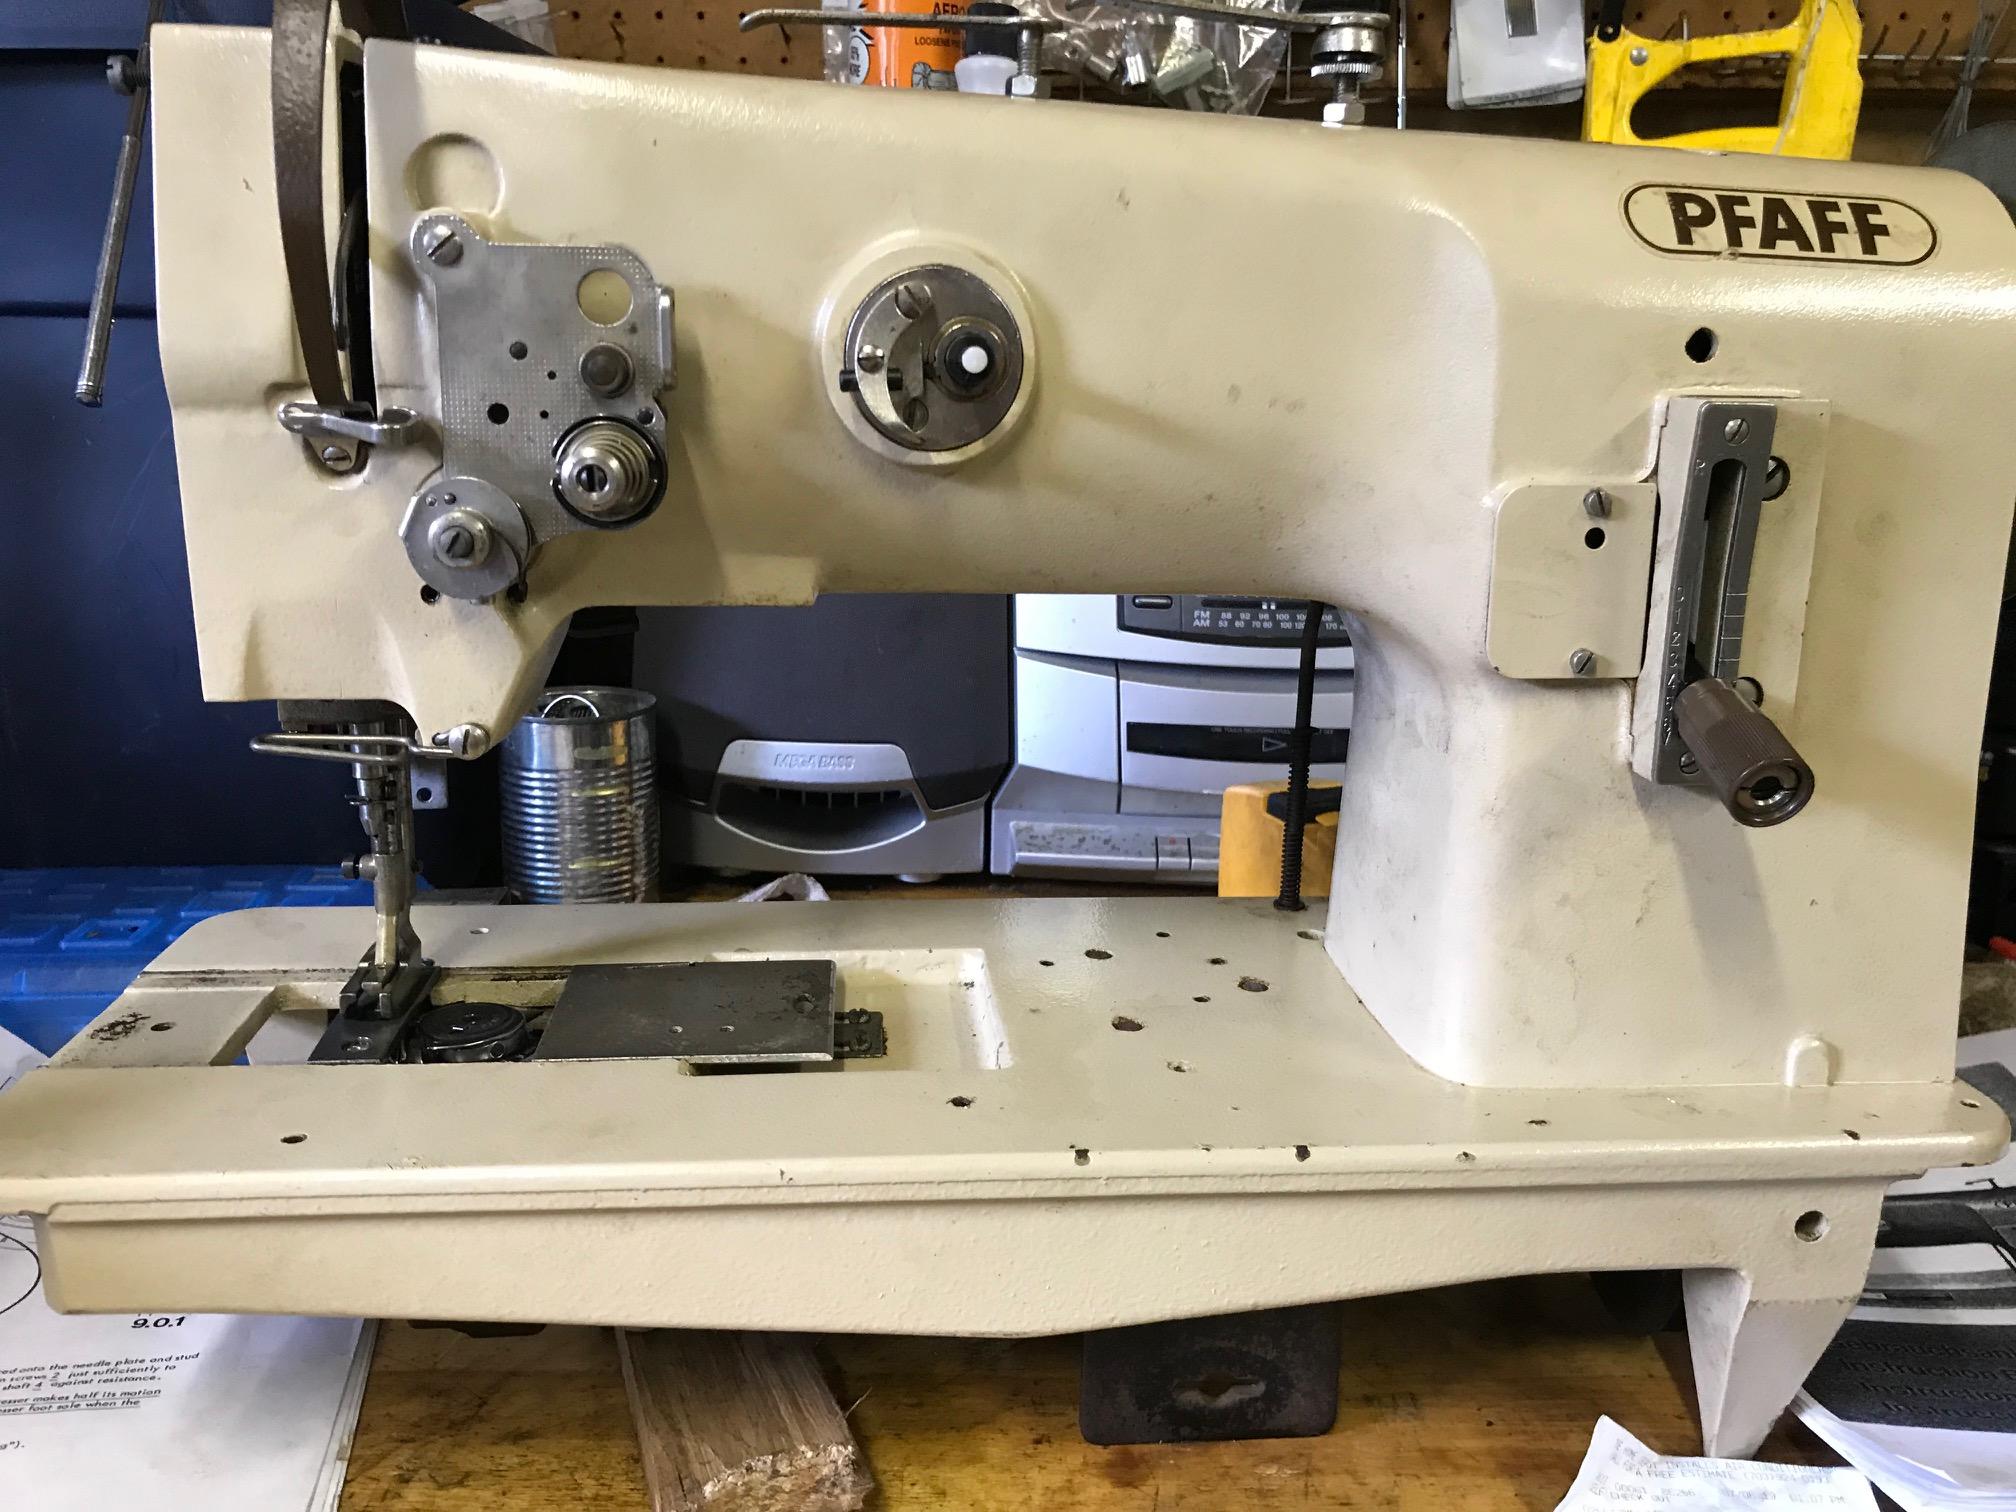 PFAFF 1245 Walking Foot Sewing Machine with Top Load Bobbin for Leather and  Upholstery - Sunny Sewing Center